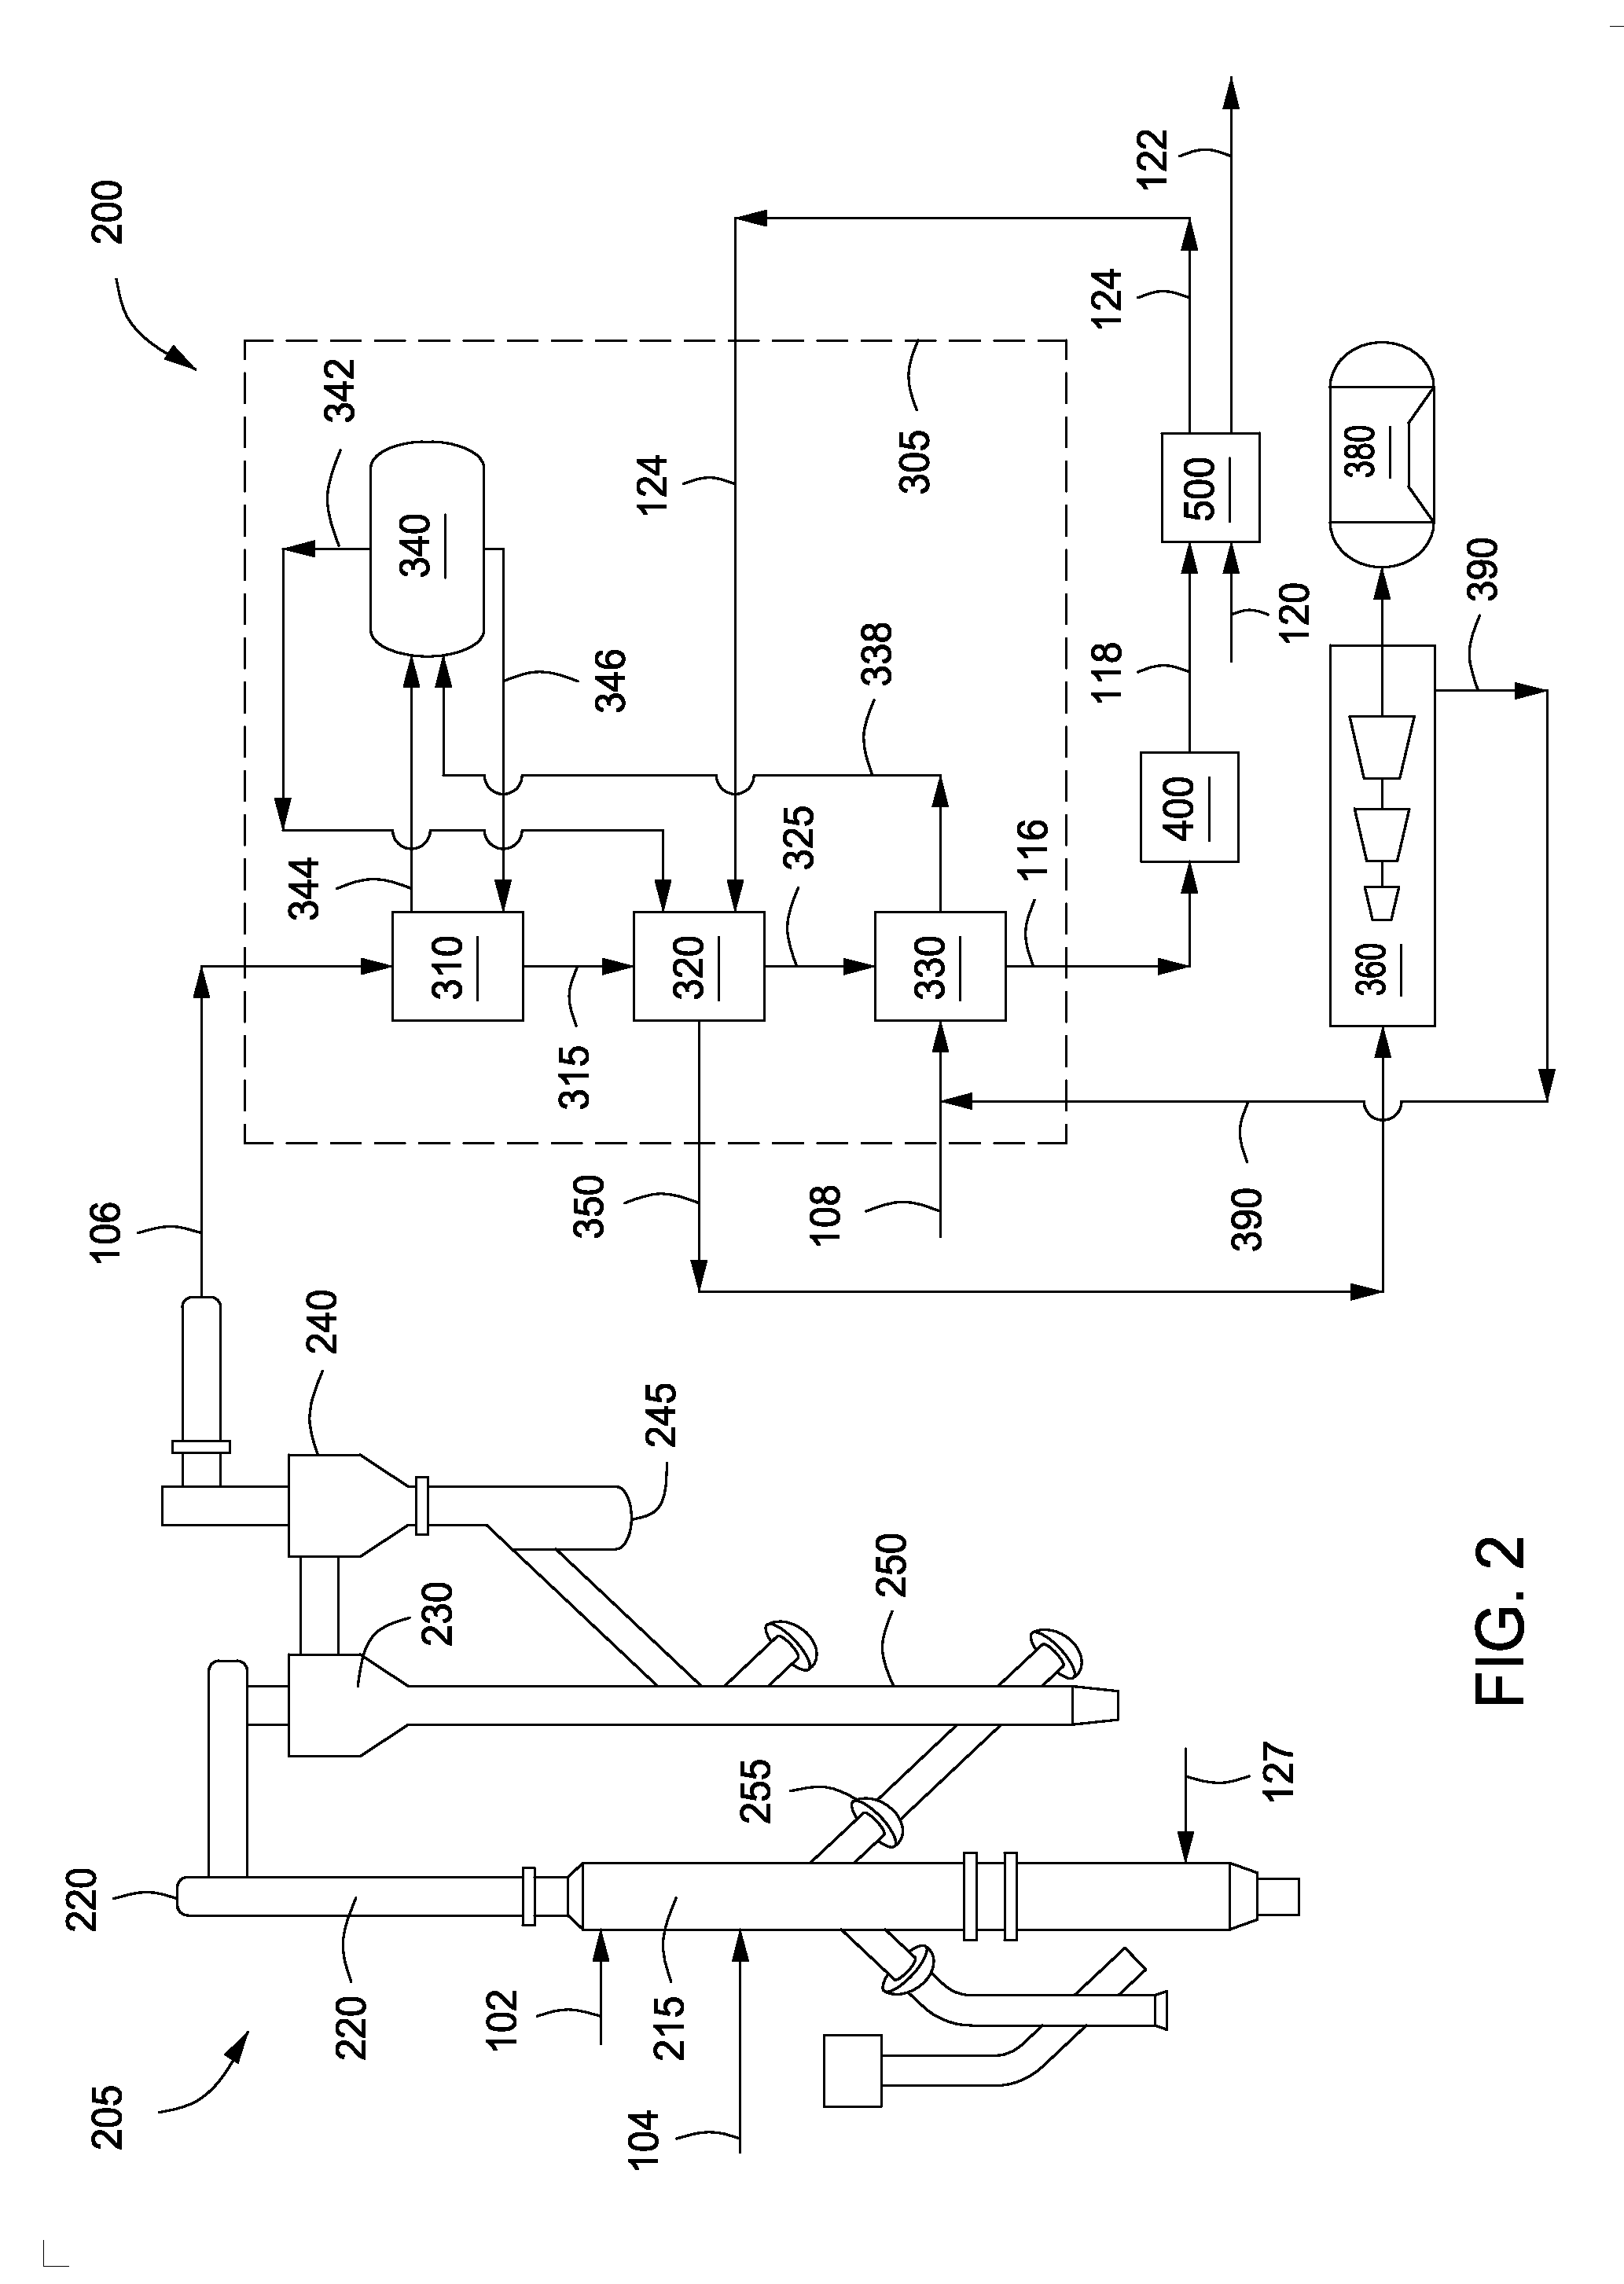 Systems and methods for producing substitute natural gas